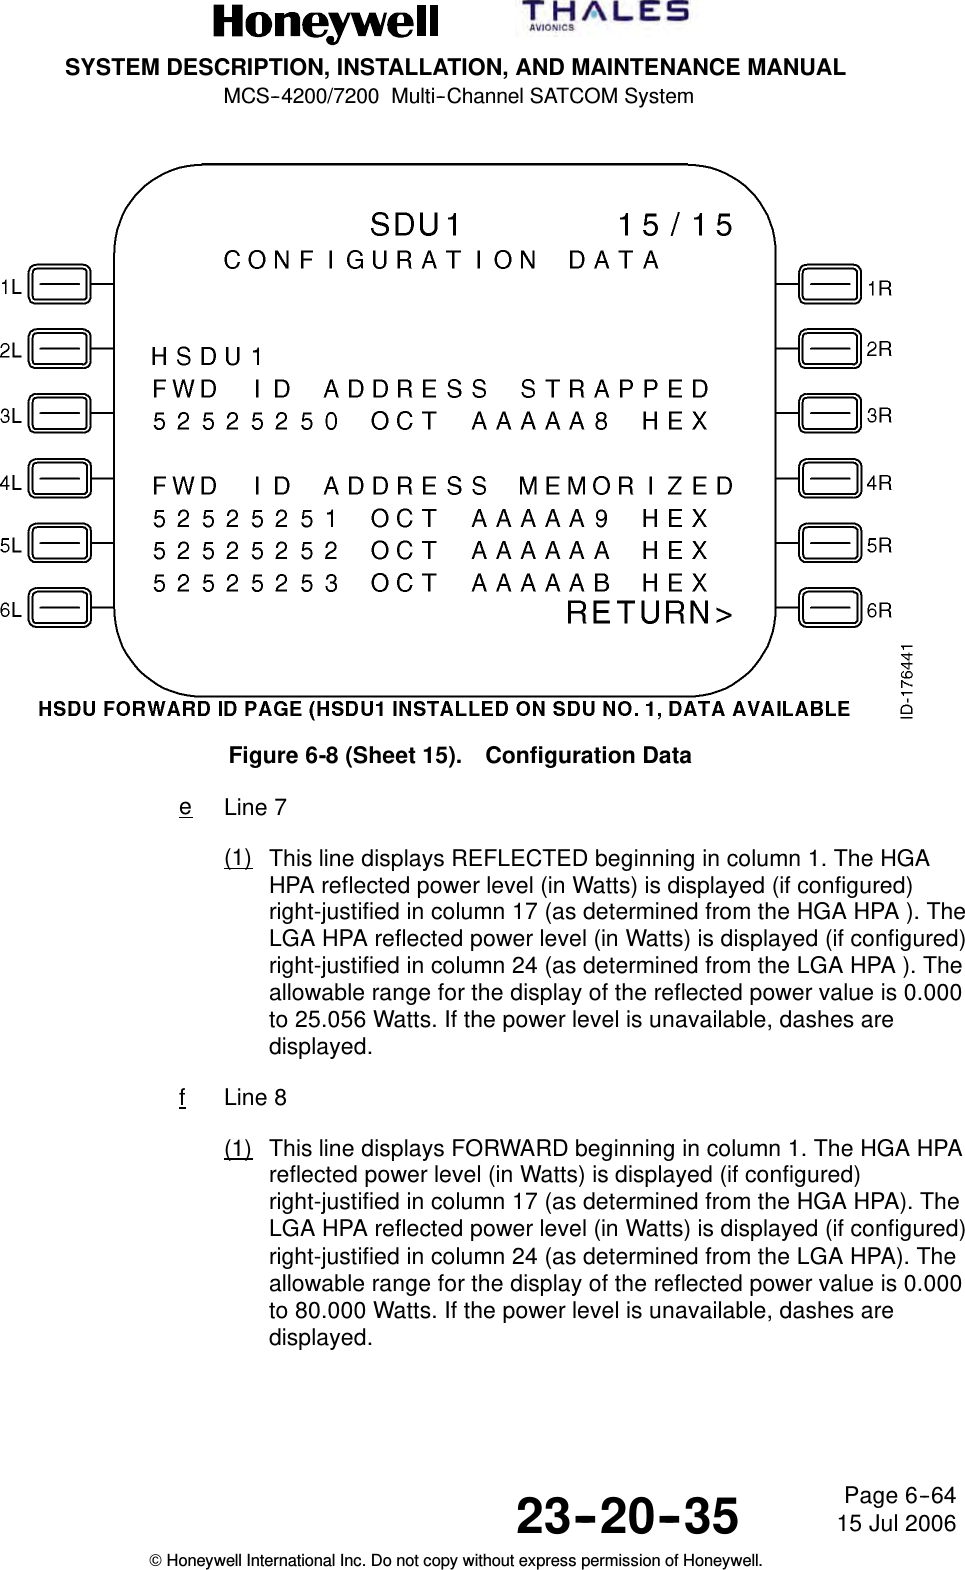 SYSTEM DESCRIPTION, INSTALLATION, AND MAINTENANCE MANUALMCS--4200/7200 Multi--Channel SATCOM System23--20--35 15 Jul 2006Honeywell International Inc. Do not copy without express permission of Honeywell.Page 6--64Figure 6-8 (Sheet 15). Configuration DataeLine 7(1) This line displays REFLECTED beginning in column 1. The HGAHPA reflected power level (in Watts) is displayed (if configured)right-justified in column 17 (as determined from the HGA HPA ). TheLGA HPA reflected power level (in Watts) is displayed (if configured)right-justified in column 24 (as determined from the LGA HPA ). Theallowable range for the display of the reflected power value is 0.000to 25.056 Watts. If the power level is unavailable, dashes aredisplayed.fLine 8(1) This line displays FORWARD beginning in column 1. The HGA HPAreflected power level (in Watts) is displayed (if configured)right-justified in column 17 (as determined from the HGA HPA). TheLGA HPA reflected power level (in Watts) is displayed (if configured)right-justified in column 24 (as determined from the LGA HPA). Theallowable range for the display of the reflected power value is 0.000to 80.000 Watts. If the power level is unavailable, dashes aredisplayed.